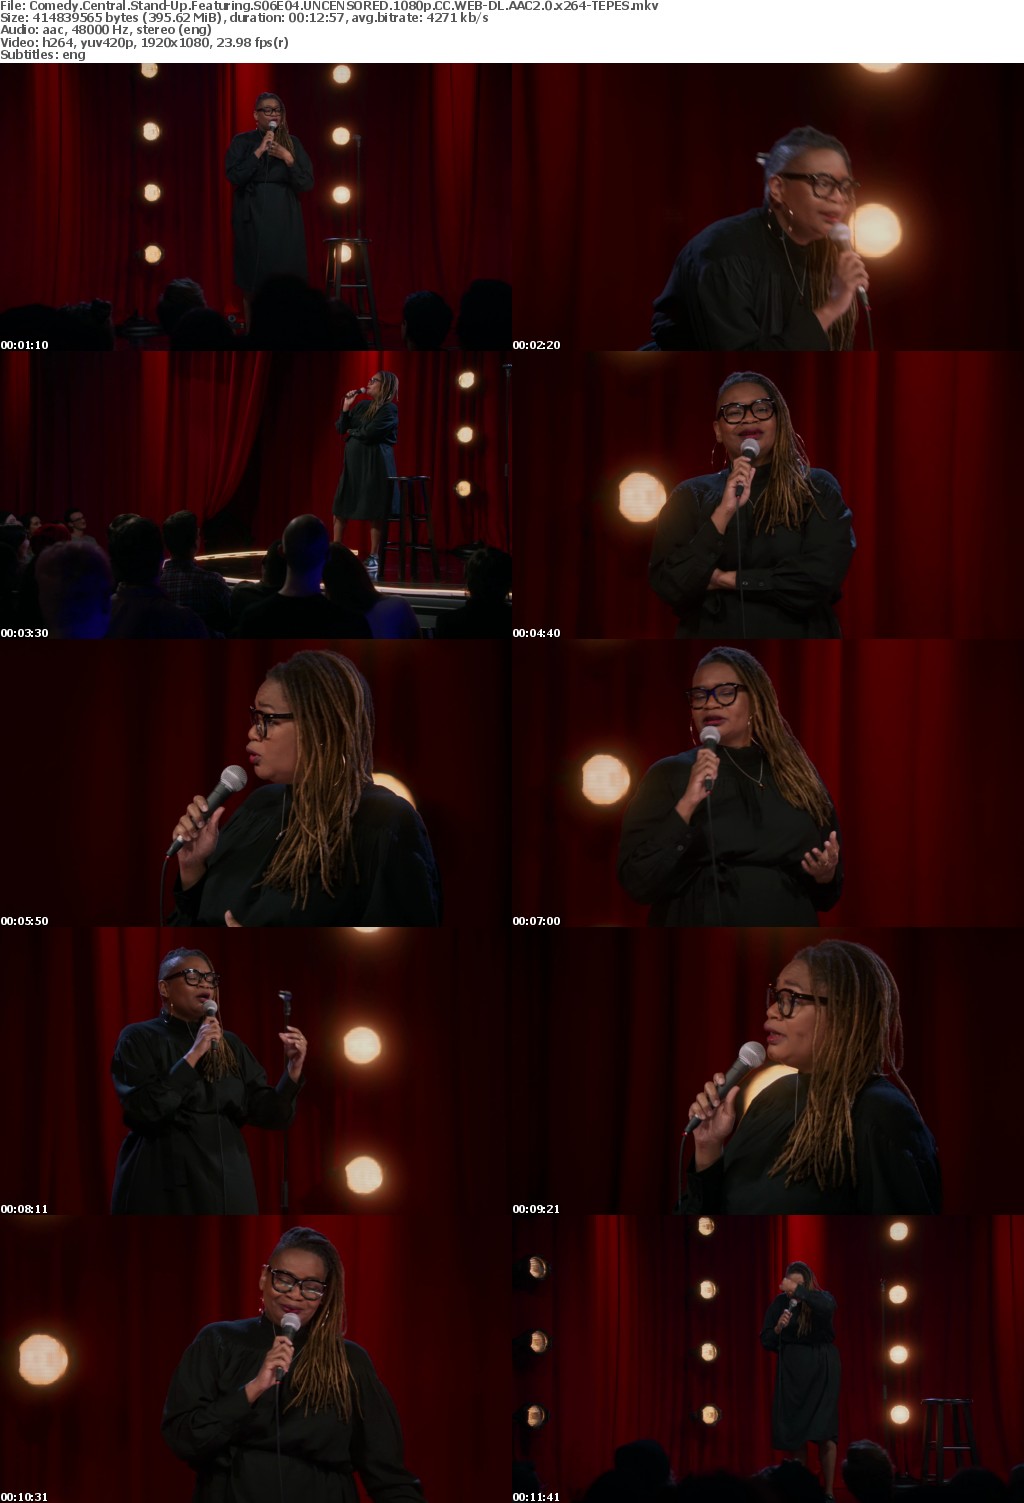 Comedy Central Stand-Up Featuring S06 UNCENSORED 1080p CC WEBRip AAC2 0 x264-TEPES